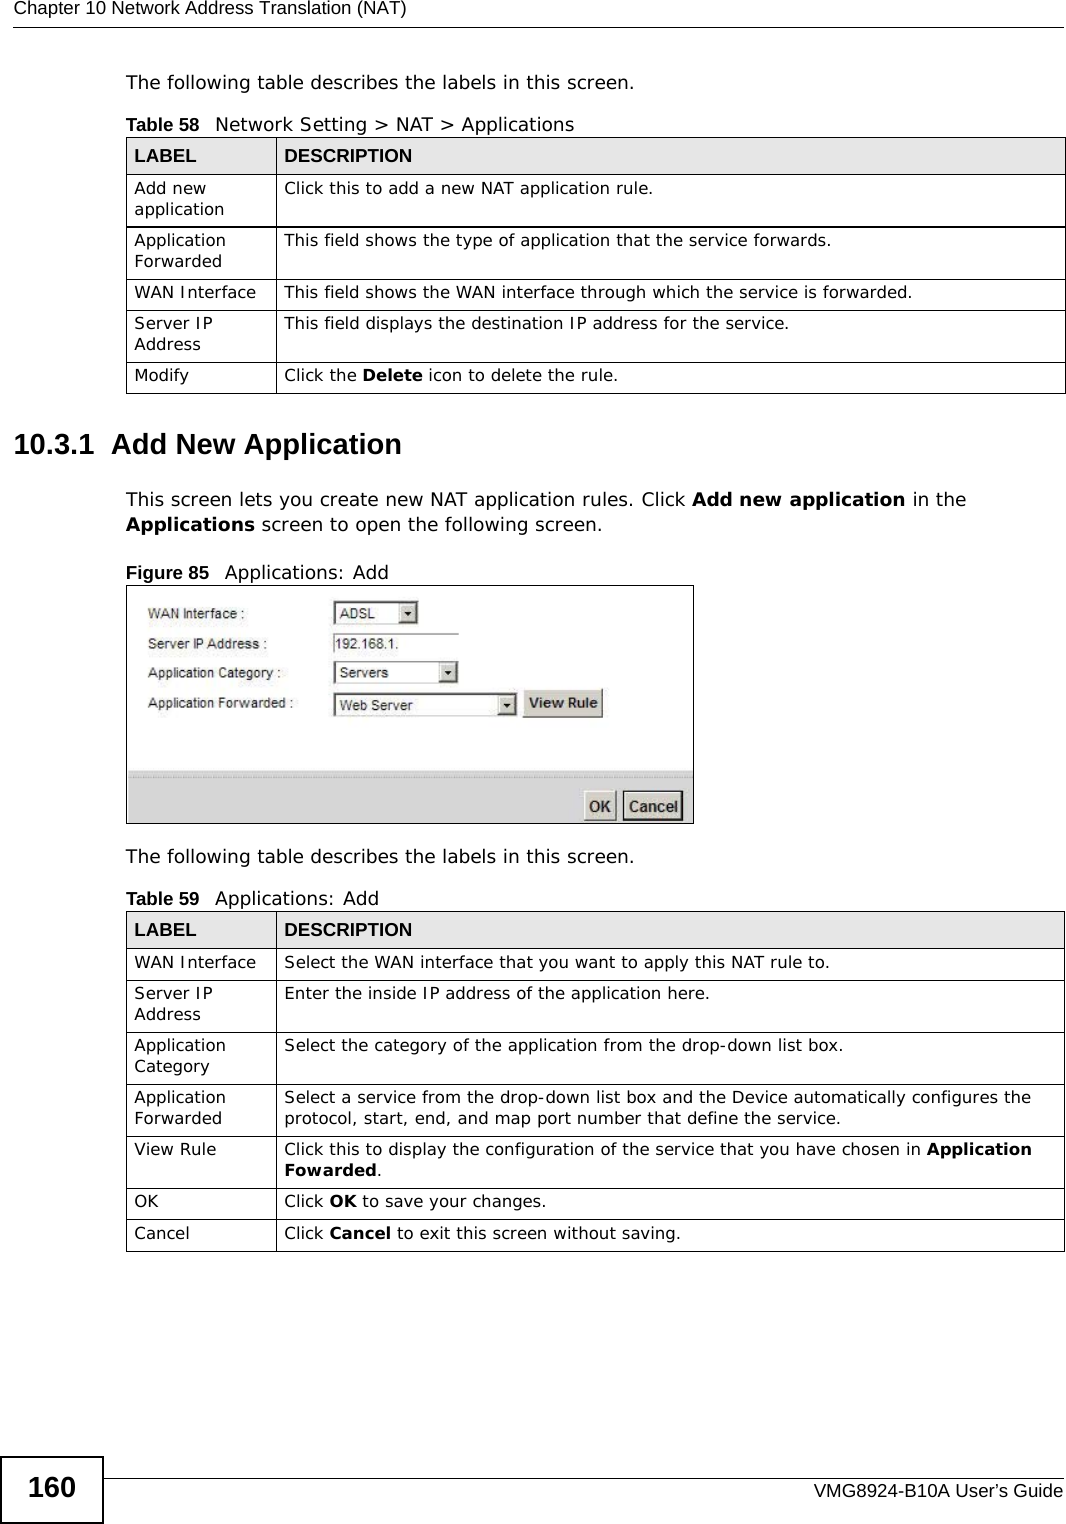 Chapter 10 Network Address Translation (NAT)VMG8924-B10A User’s Guide160The following table describes the labels in this screen. 10.3.1  Add New ApplicationThis screen lets you create new NAT application rules. Click Add new application in the Applications screen to open the following screen.Figure 85   Applications: Add The following table describes the labels in this screen. Table 58   Network Setting &gt; NAT &gt; ApplicationsLABEL DESCRIPTIONAdd new application Click this to add a new NAT application rule.Application Forwarded This field shows the type of application that the service forwards.WAN Interface This field shows the WAN interface through which the service is forwarded.Server IP Address This field displays the destination IP address for the service.Modify Click the Delete icon to delete the rule.Table 59   Applications: AddLABEL DESCRIPTIONWAN Interface Select the WAN interface that you want to apply this NAT rule to.Server IP Address Enter the inside IP address of the application here.Application Category Select the category of the application from the drop-down list box.Application Forwarded Select a service from the drop-down list box and the Device automatically configures the protocol, start, end, and map port number that define the service.View Rule Click this to display the configuration of the service that you have chosen in Application Fowarded.OK Click OK to save your changes.Cancel Click Cancel to exit this screen without saving.